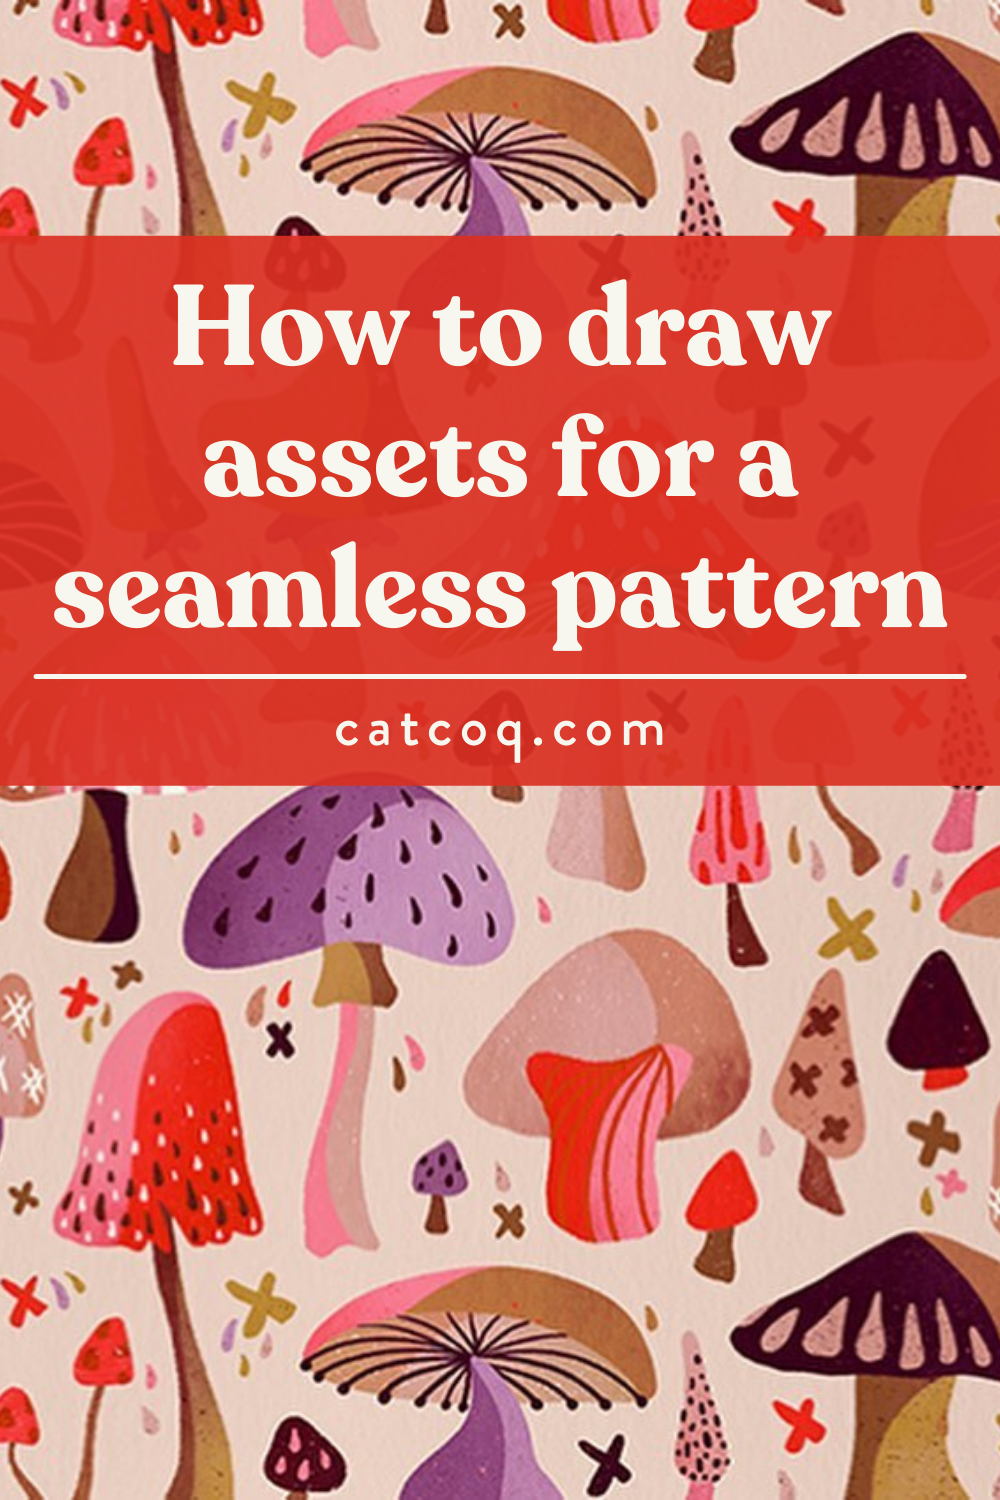 How to draw assets for a seamless pattern.png